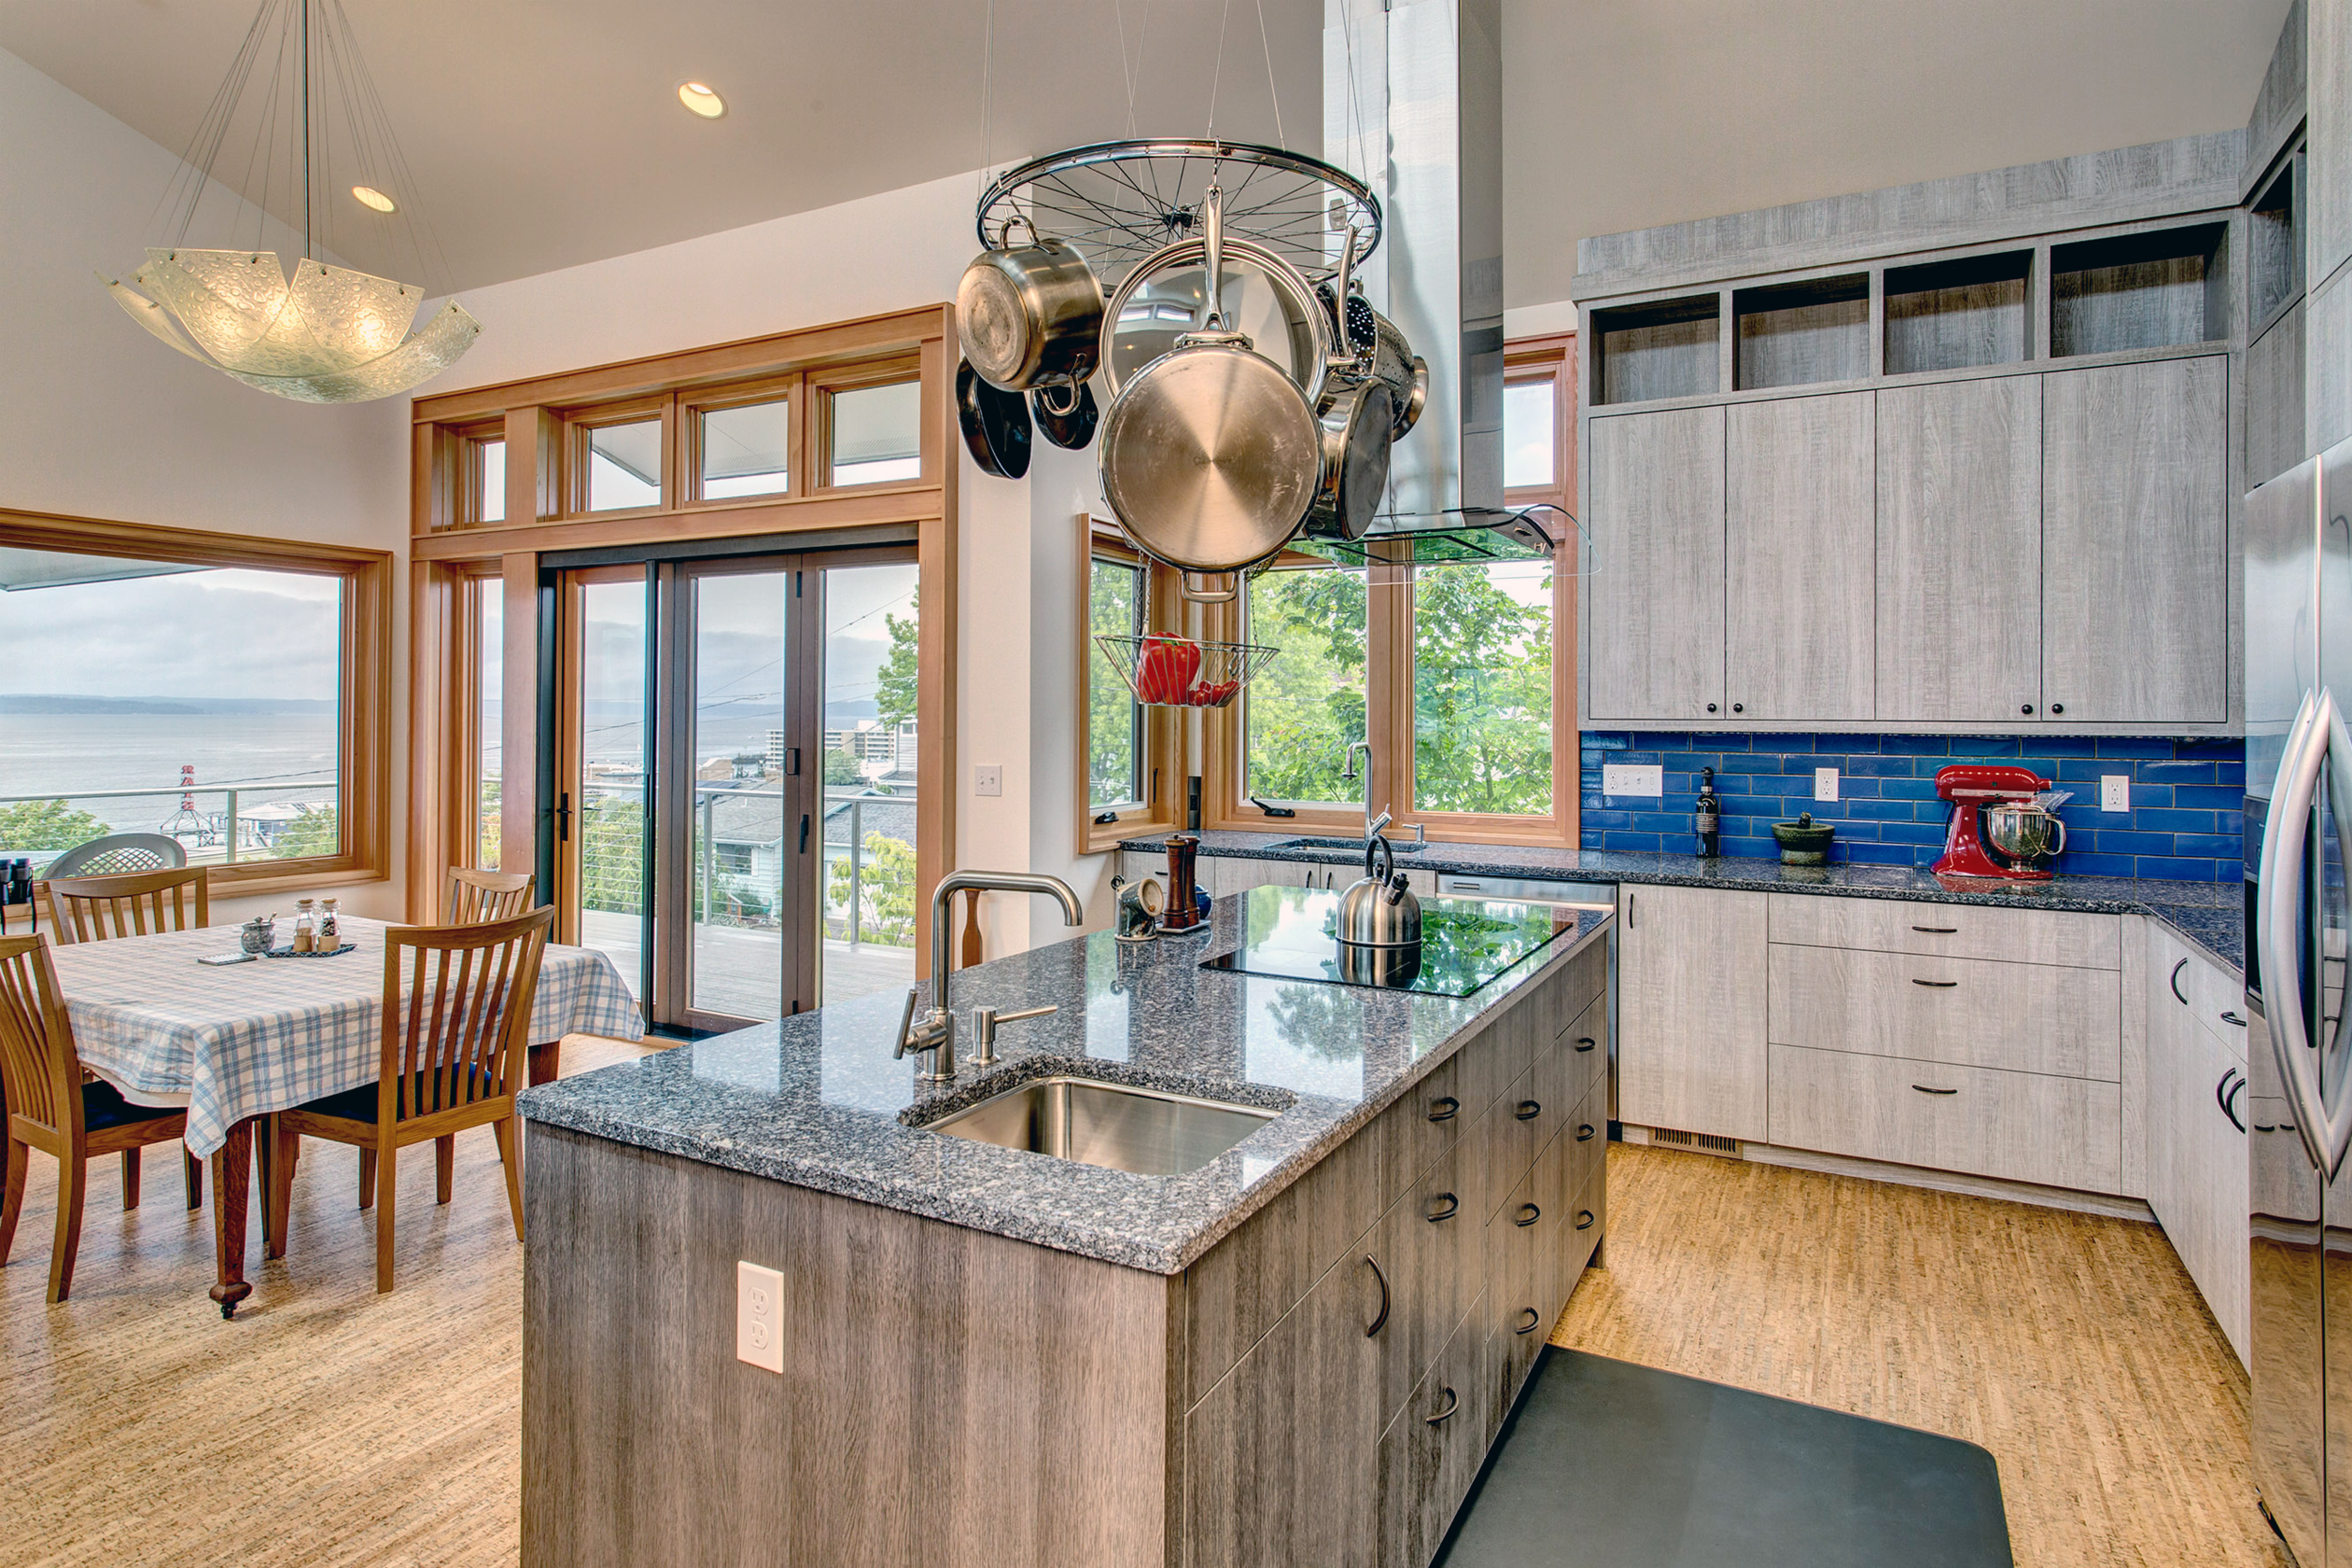 Ballard Locks Residence: Green Home Remodel – Folding doors off the kitchen to the deck.